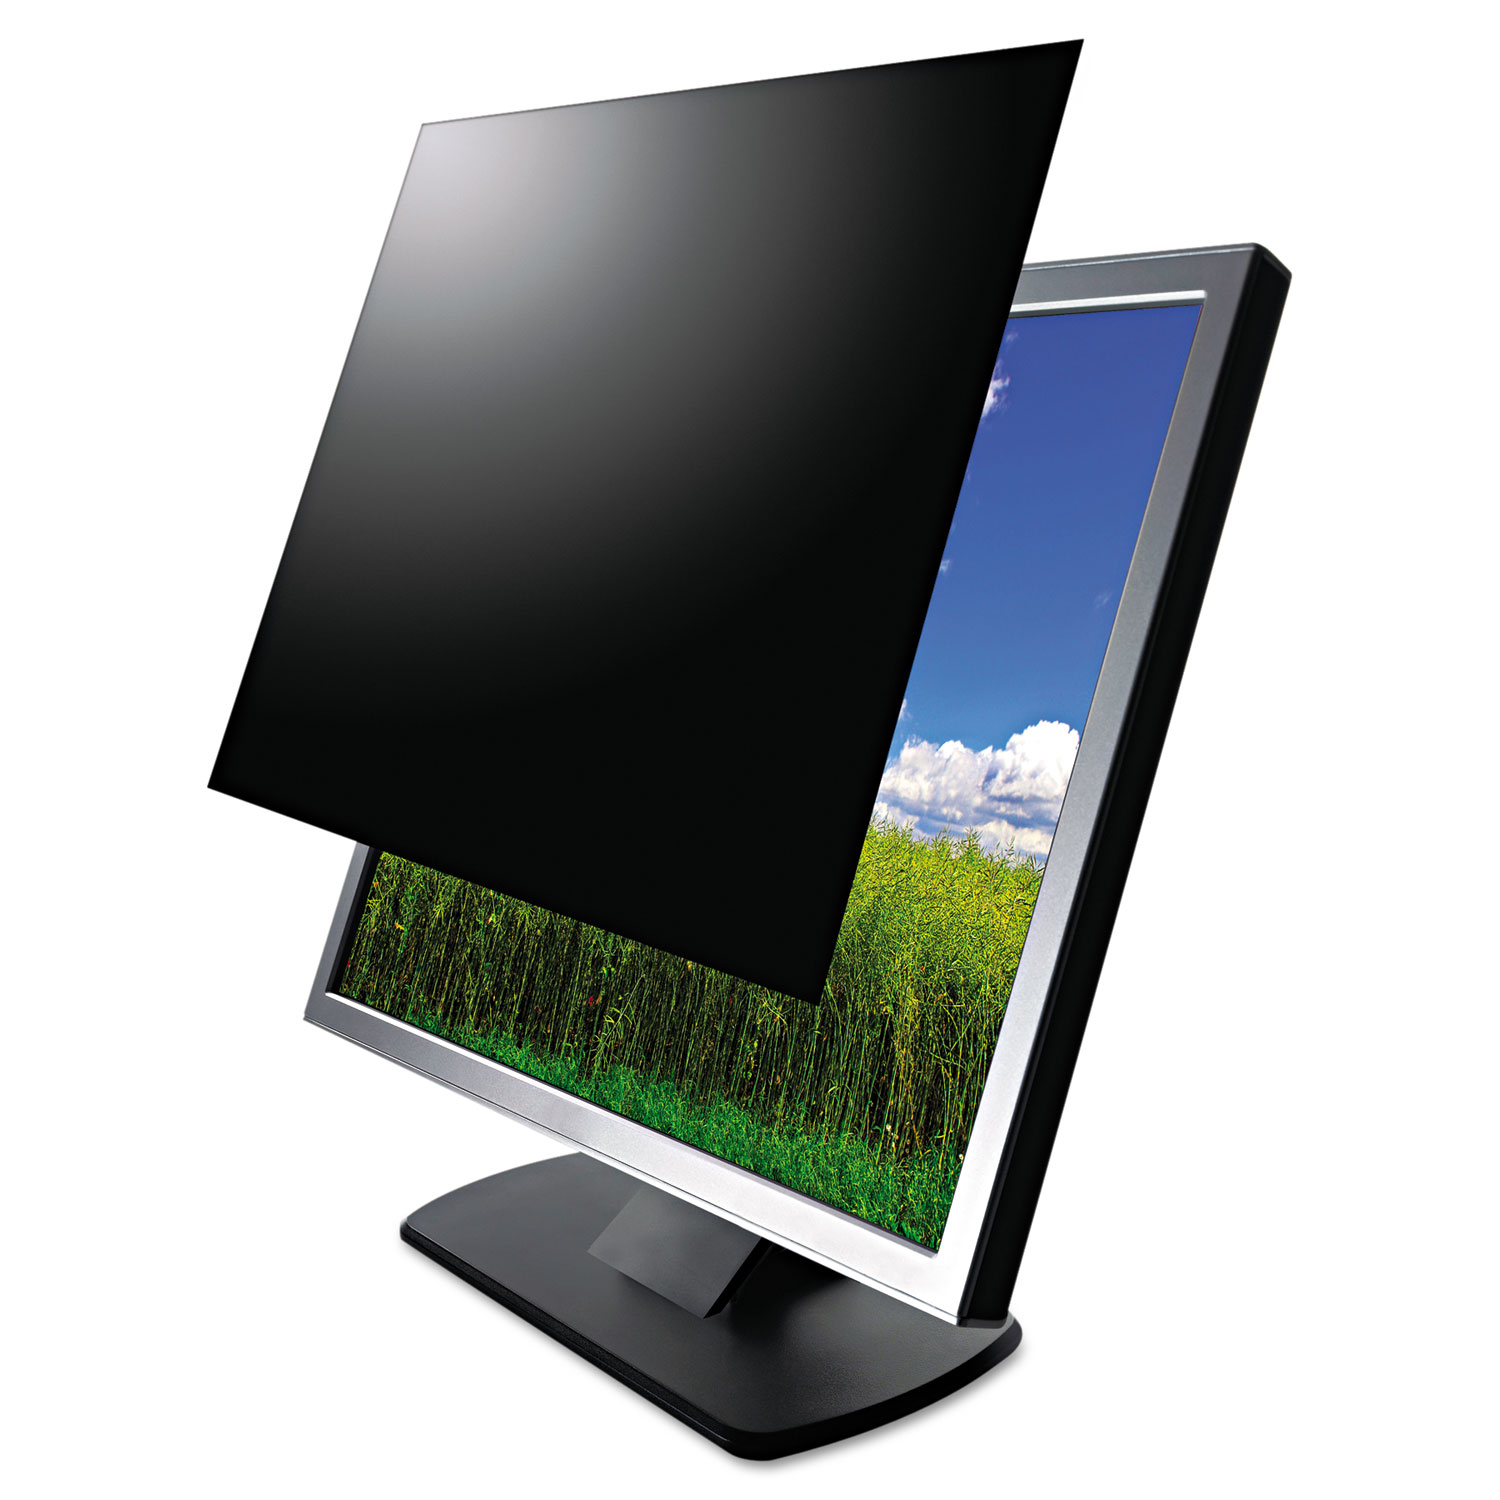  Kantek SVL24W Secure View LCD Monitor Privacy Filter for 24 Widescreen LCD (KTKSVL24W) 